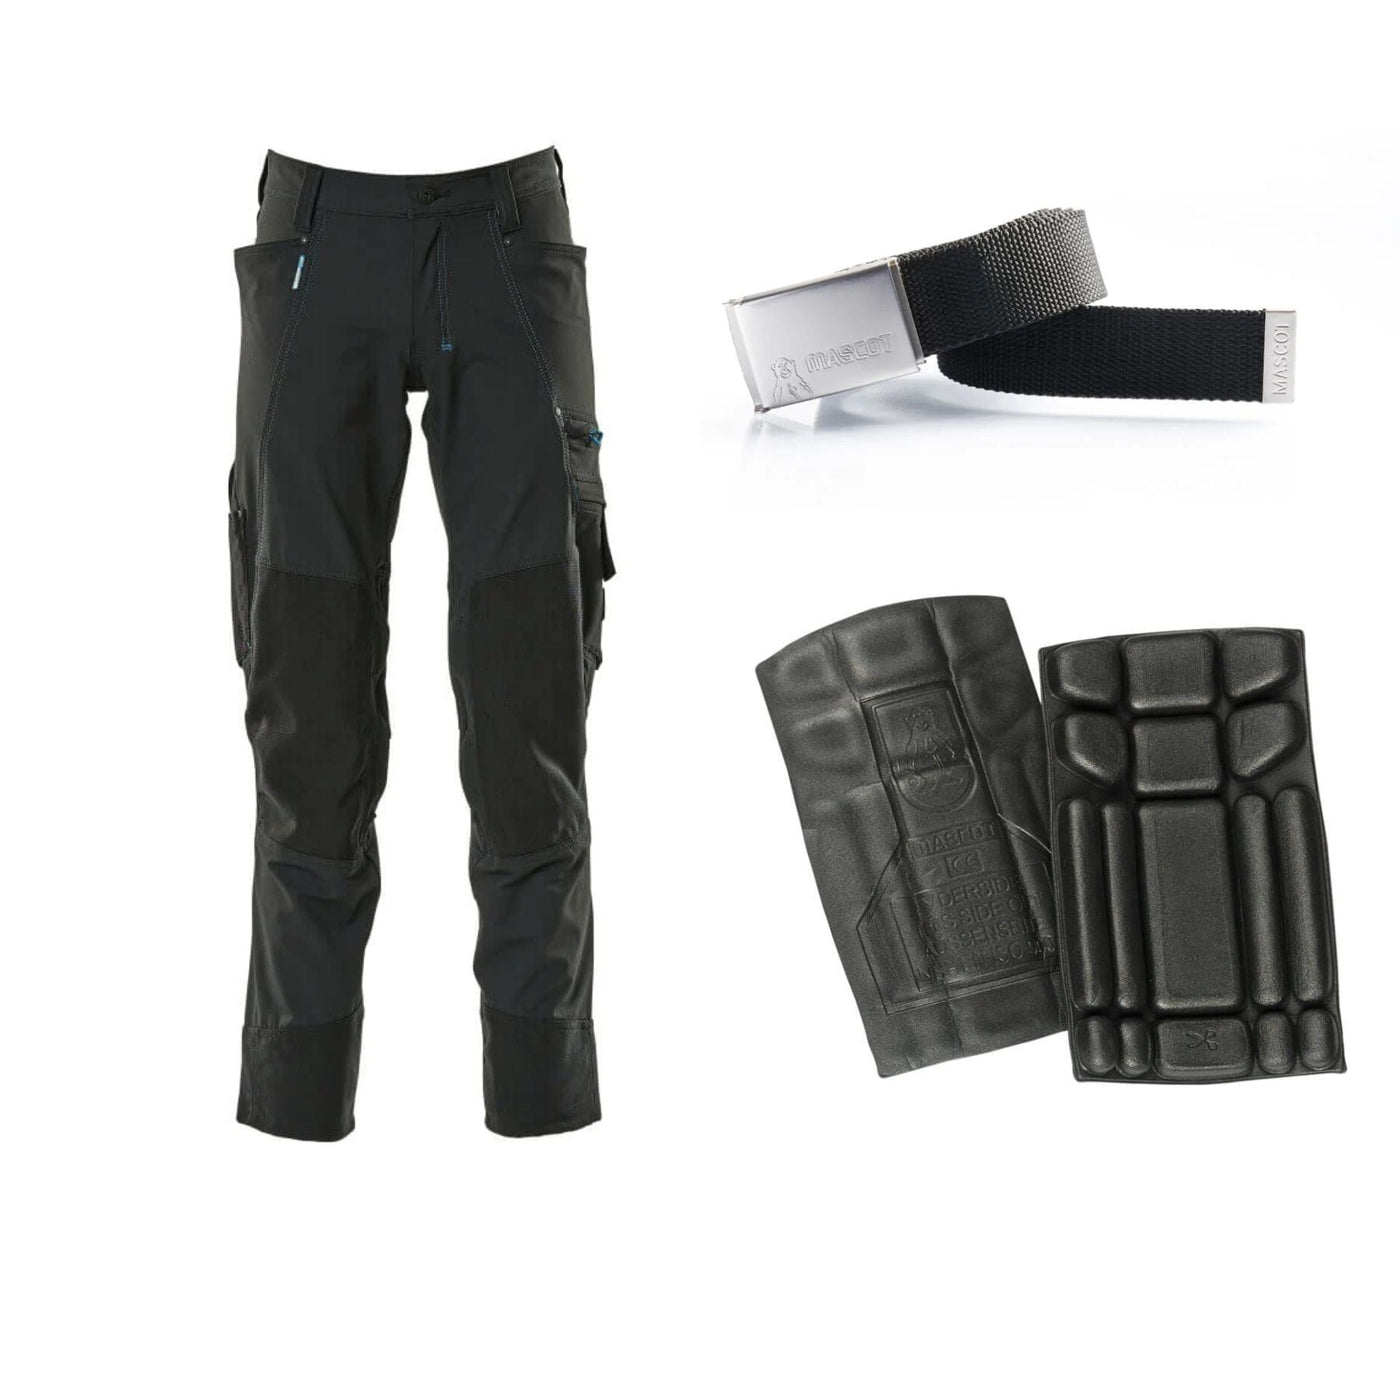 Mascot Special Offer 17179-311 Advanced Trousers Pack - 4-Way-Stretch Trousers + Belt + Knee Pads